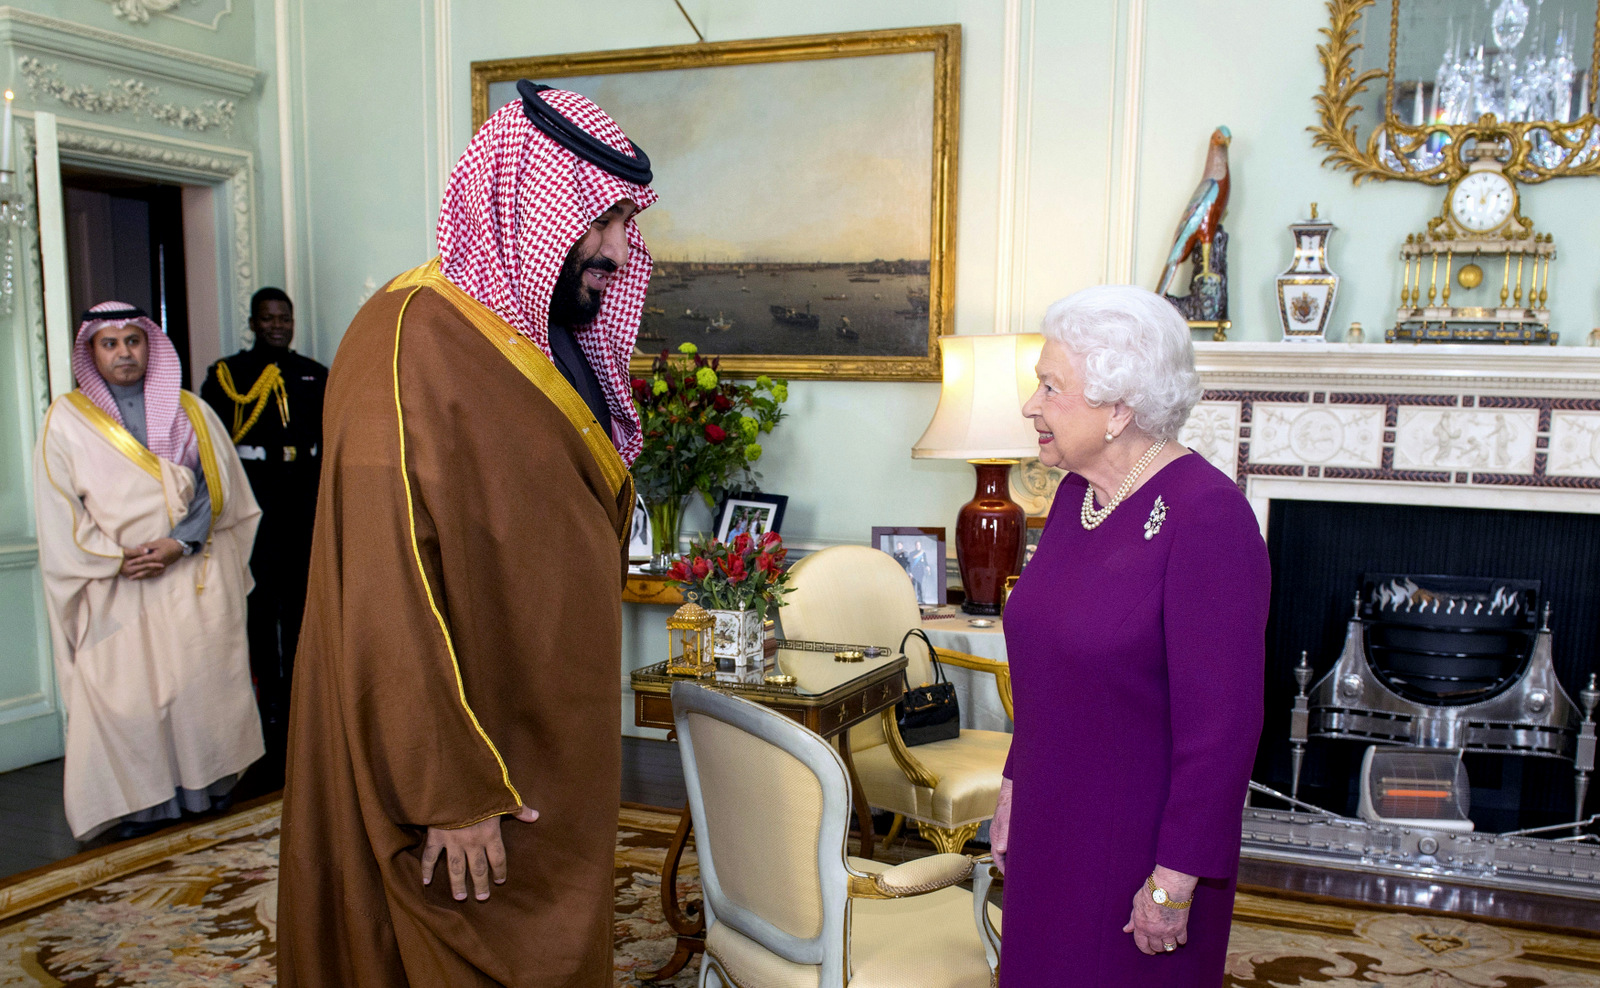 Britain's Queen Elizabeth II greets the Crown Prince of Saudi Arabia Mohammed bin Salman, during a private audience at Buckingham Palace in London, March 7, 2018. (Dominic Lipinski/AP)